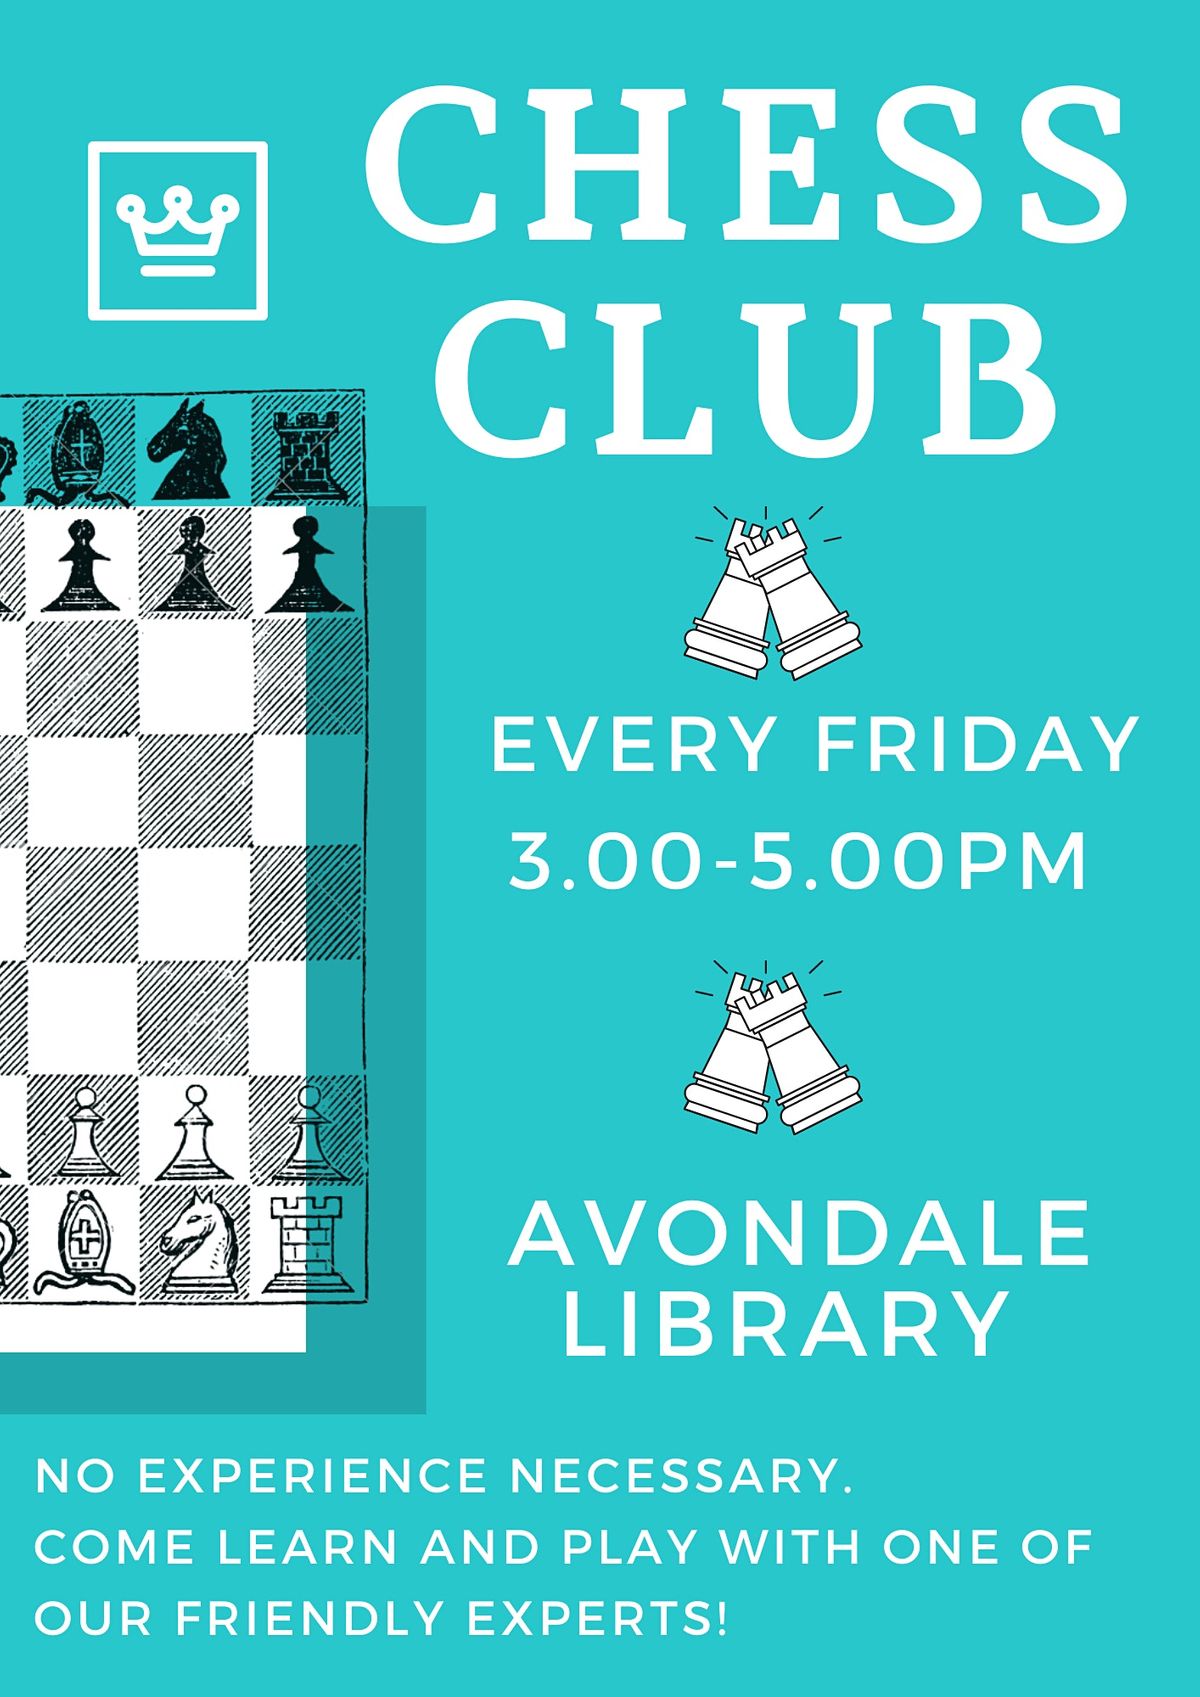 Chess Club at Avondale Library